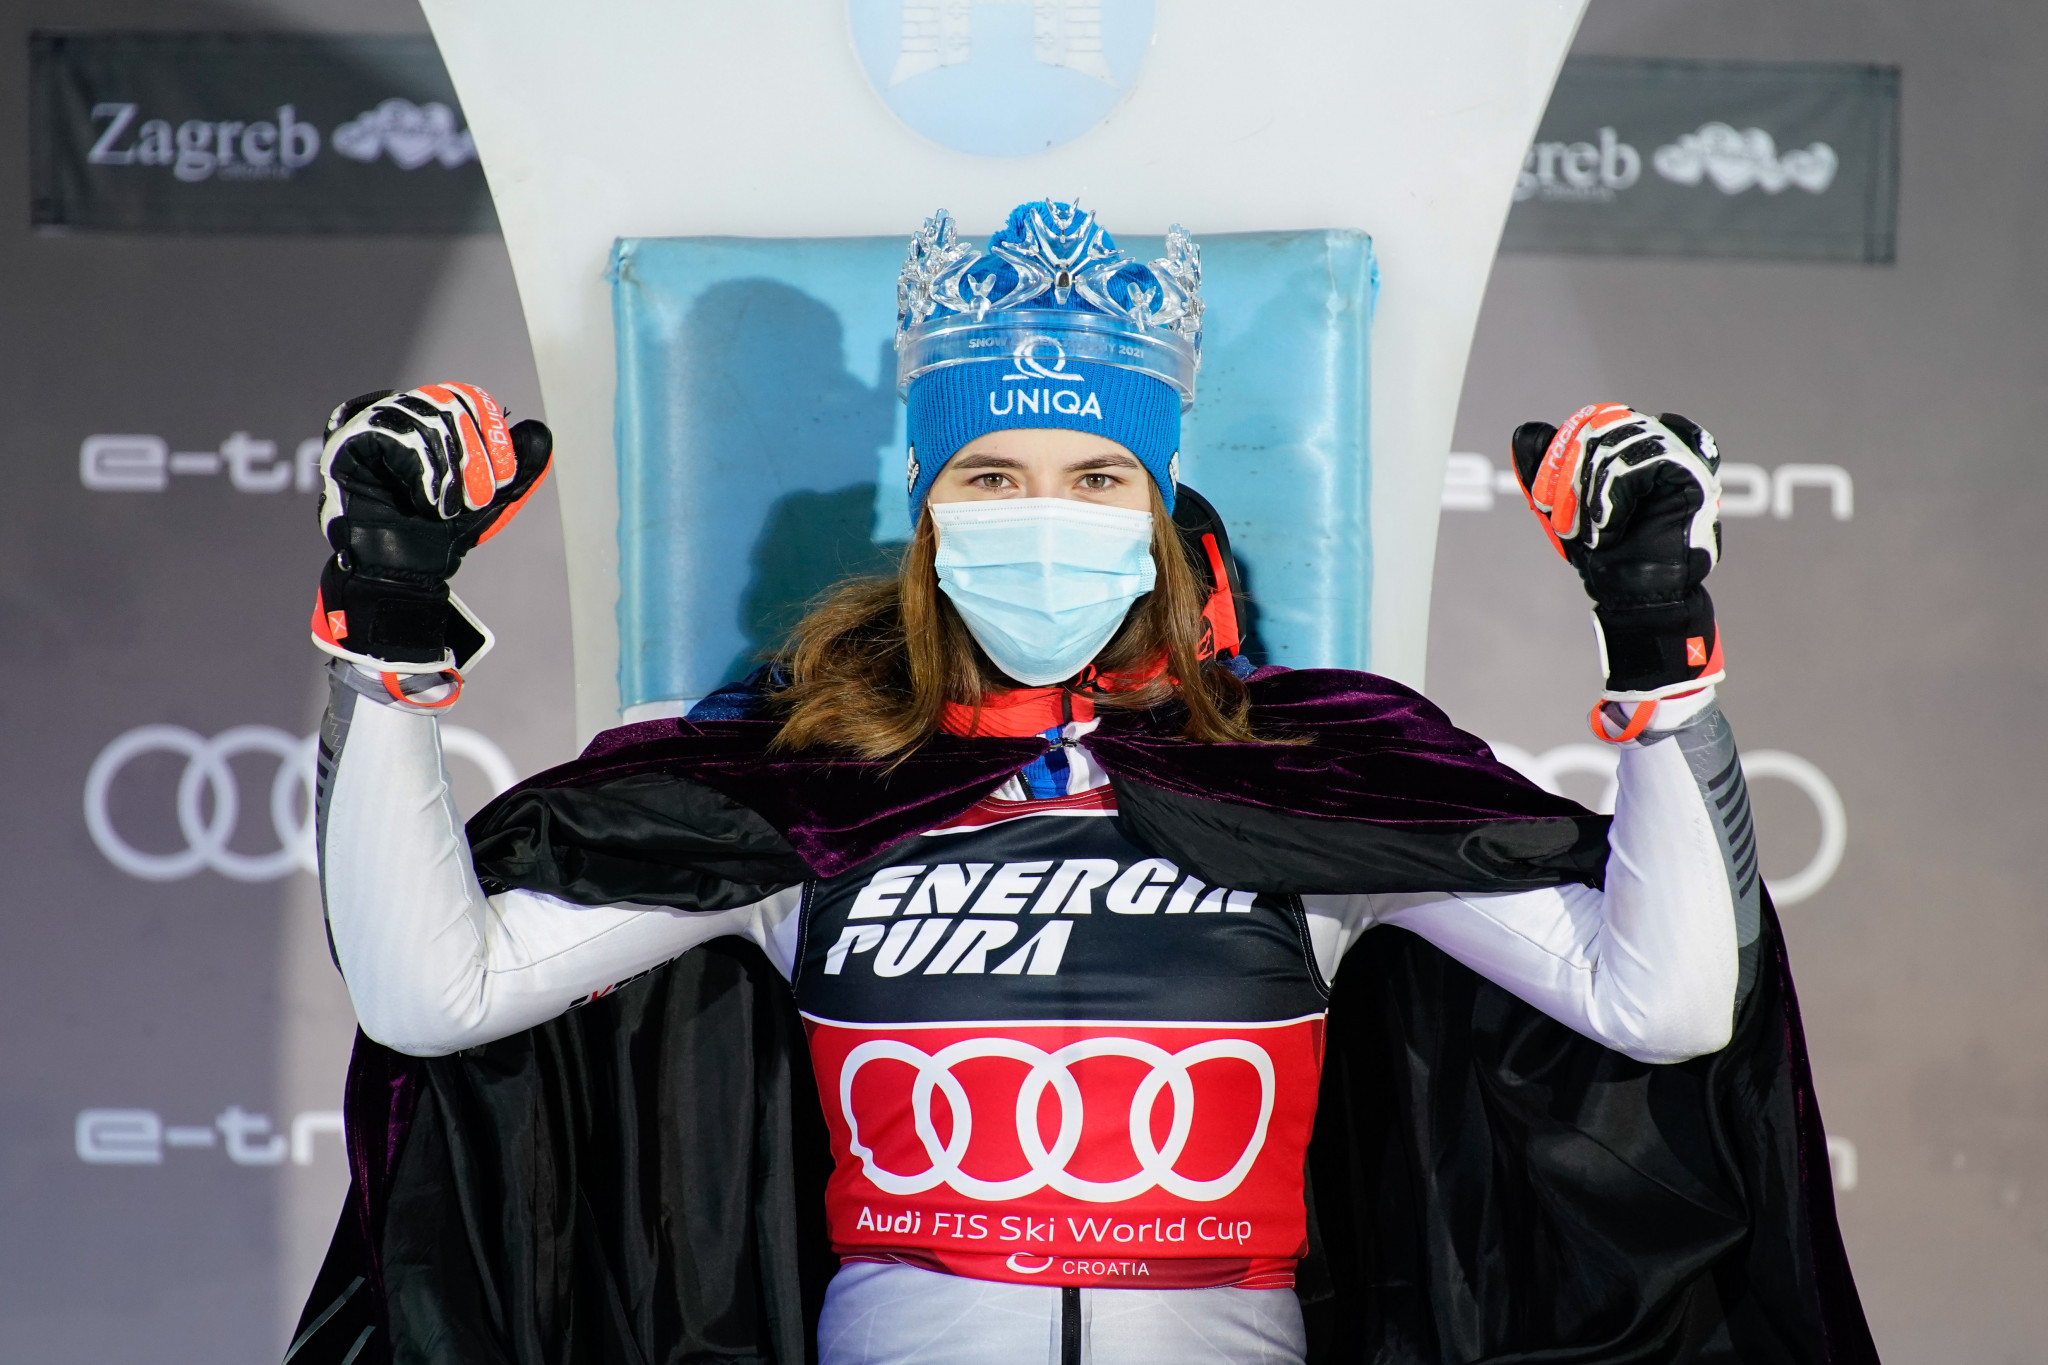 Vlhová retains Snow Queen title at FIS Alpine Ski World Cup event in Zagreb